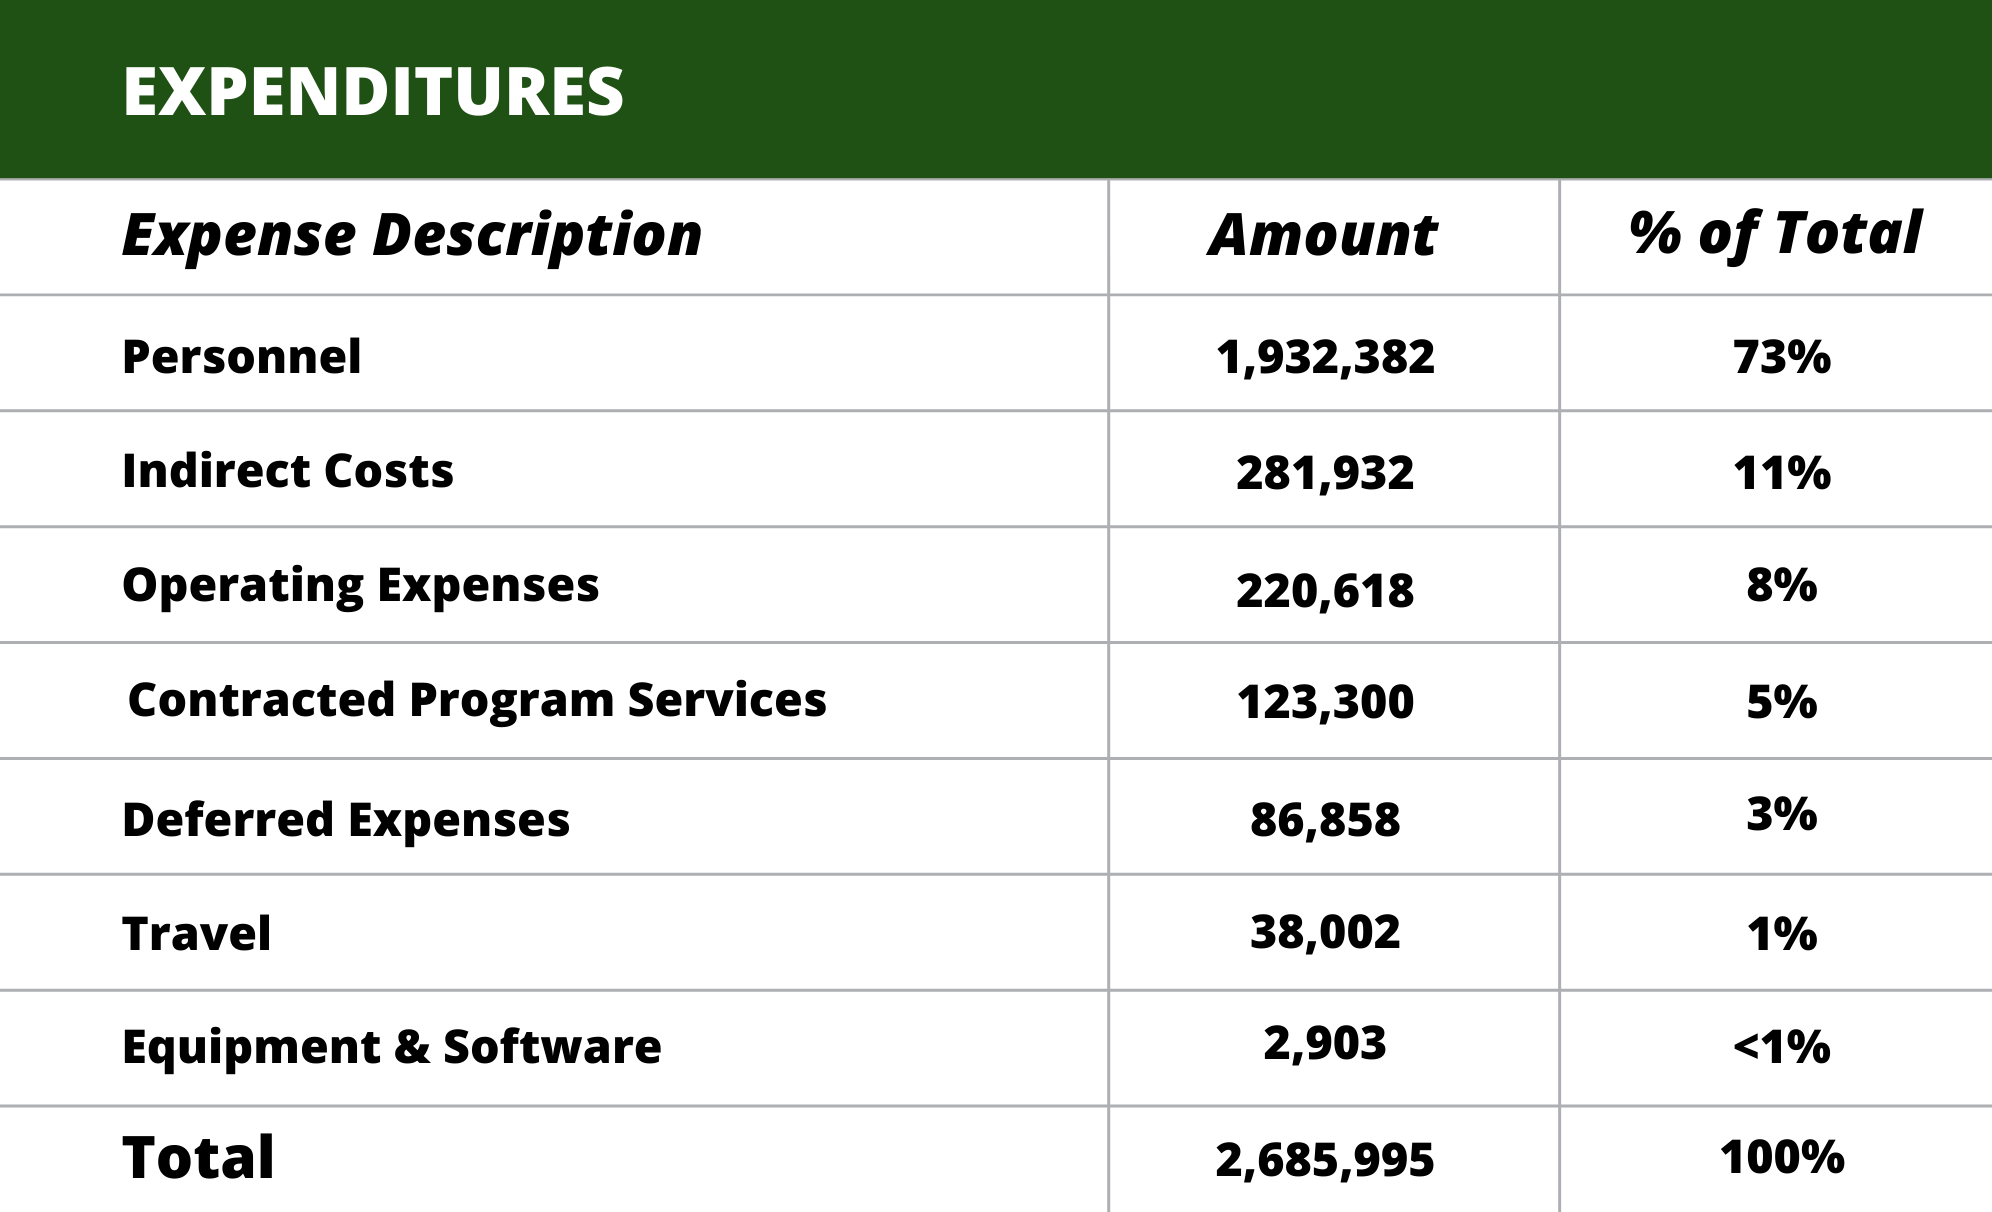 Expense Description of expenditures breaks down as follows, Personnel - 1,932,382 or 73% Indirect Costs - 281,932 or 11% Operating Expenses - 220,618 or 8% Contracted Program Services - 123,300 or 5% Deferred Expenses - 86,858 or 3% Travel - 38,002 or 1% Equipment & Software - 2,903 or